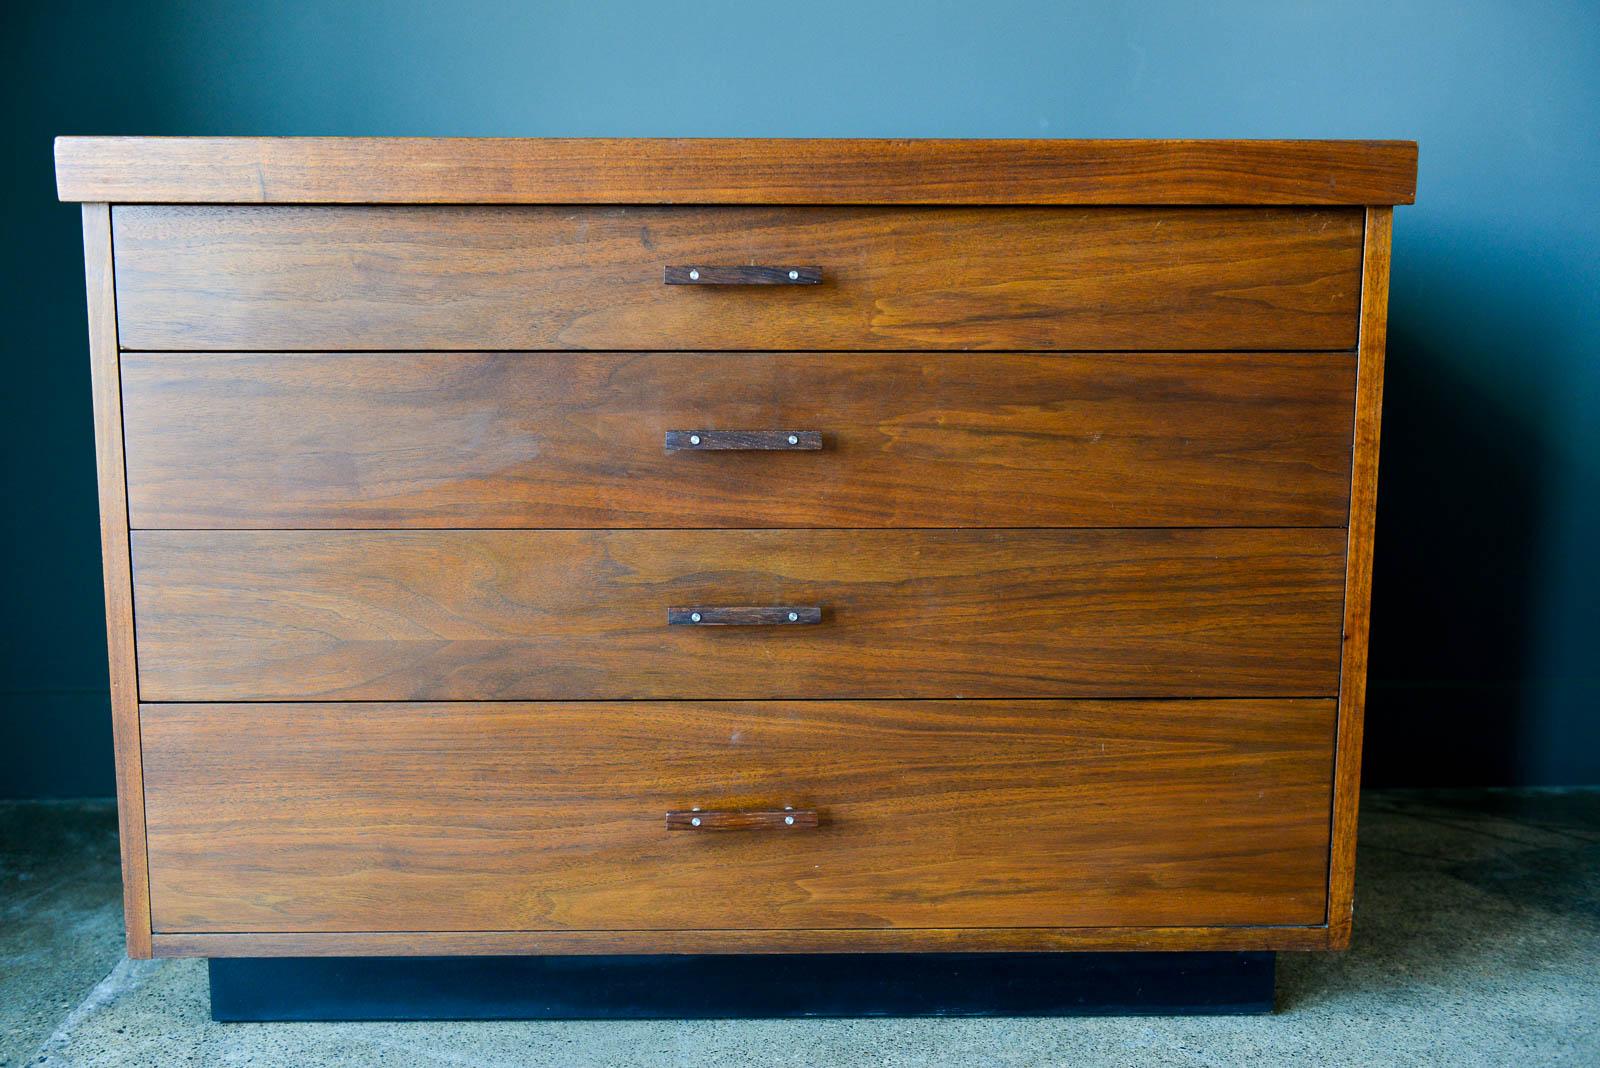 Walnut 4-drawer cabinet by Milo Baughman for Glenn of California, circa 1965. Original black laminate top with rosewood drawer pulls on a black platform base. Very good vintage condition, unrestored with only slight wear as shown.

Measures: 37